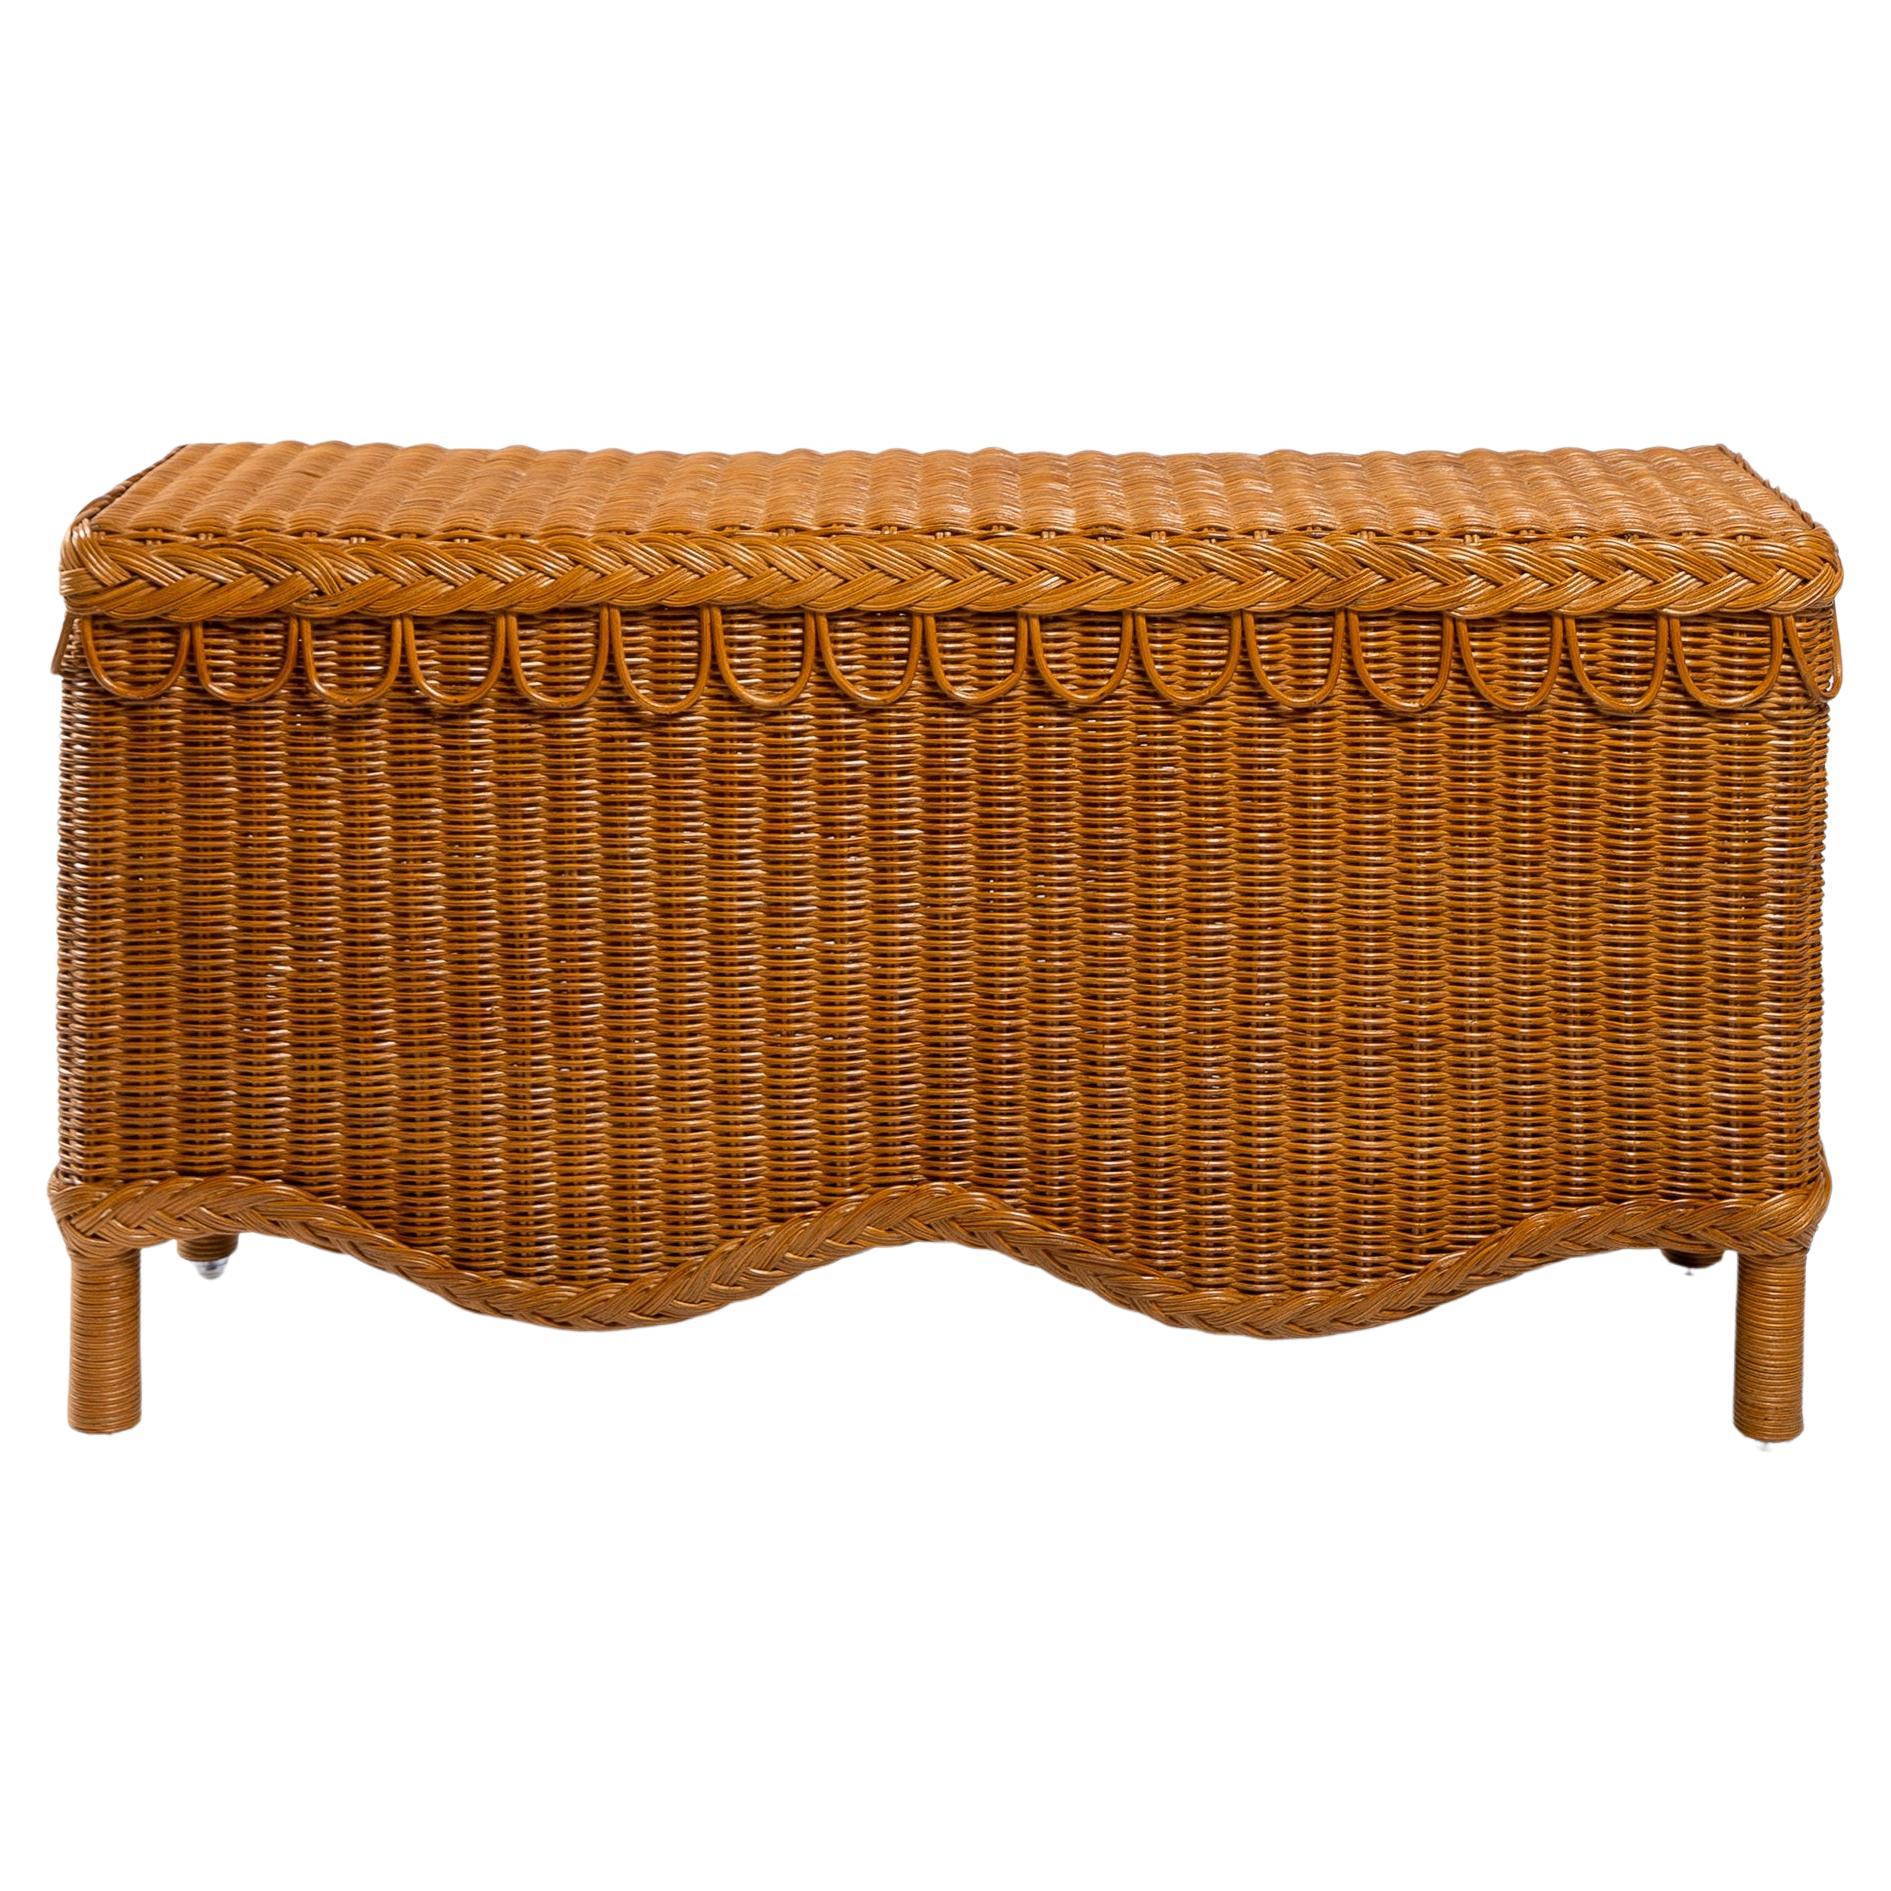 Bunny Bench in Natural Honey Rattan, Modern furniture by Louise Roe